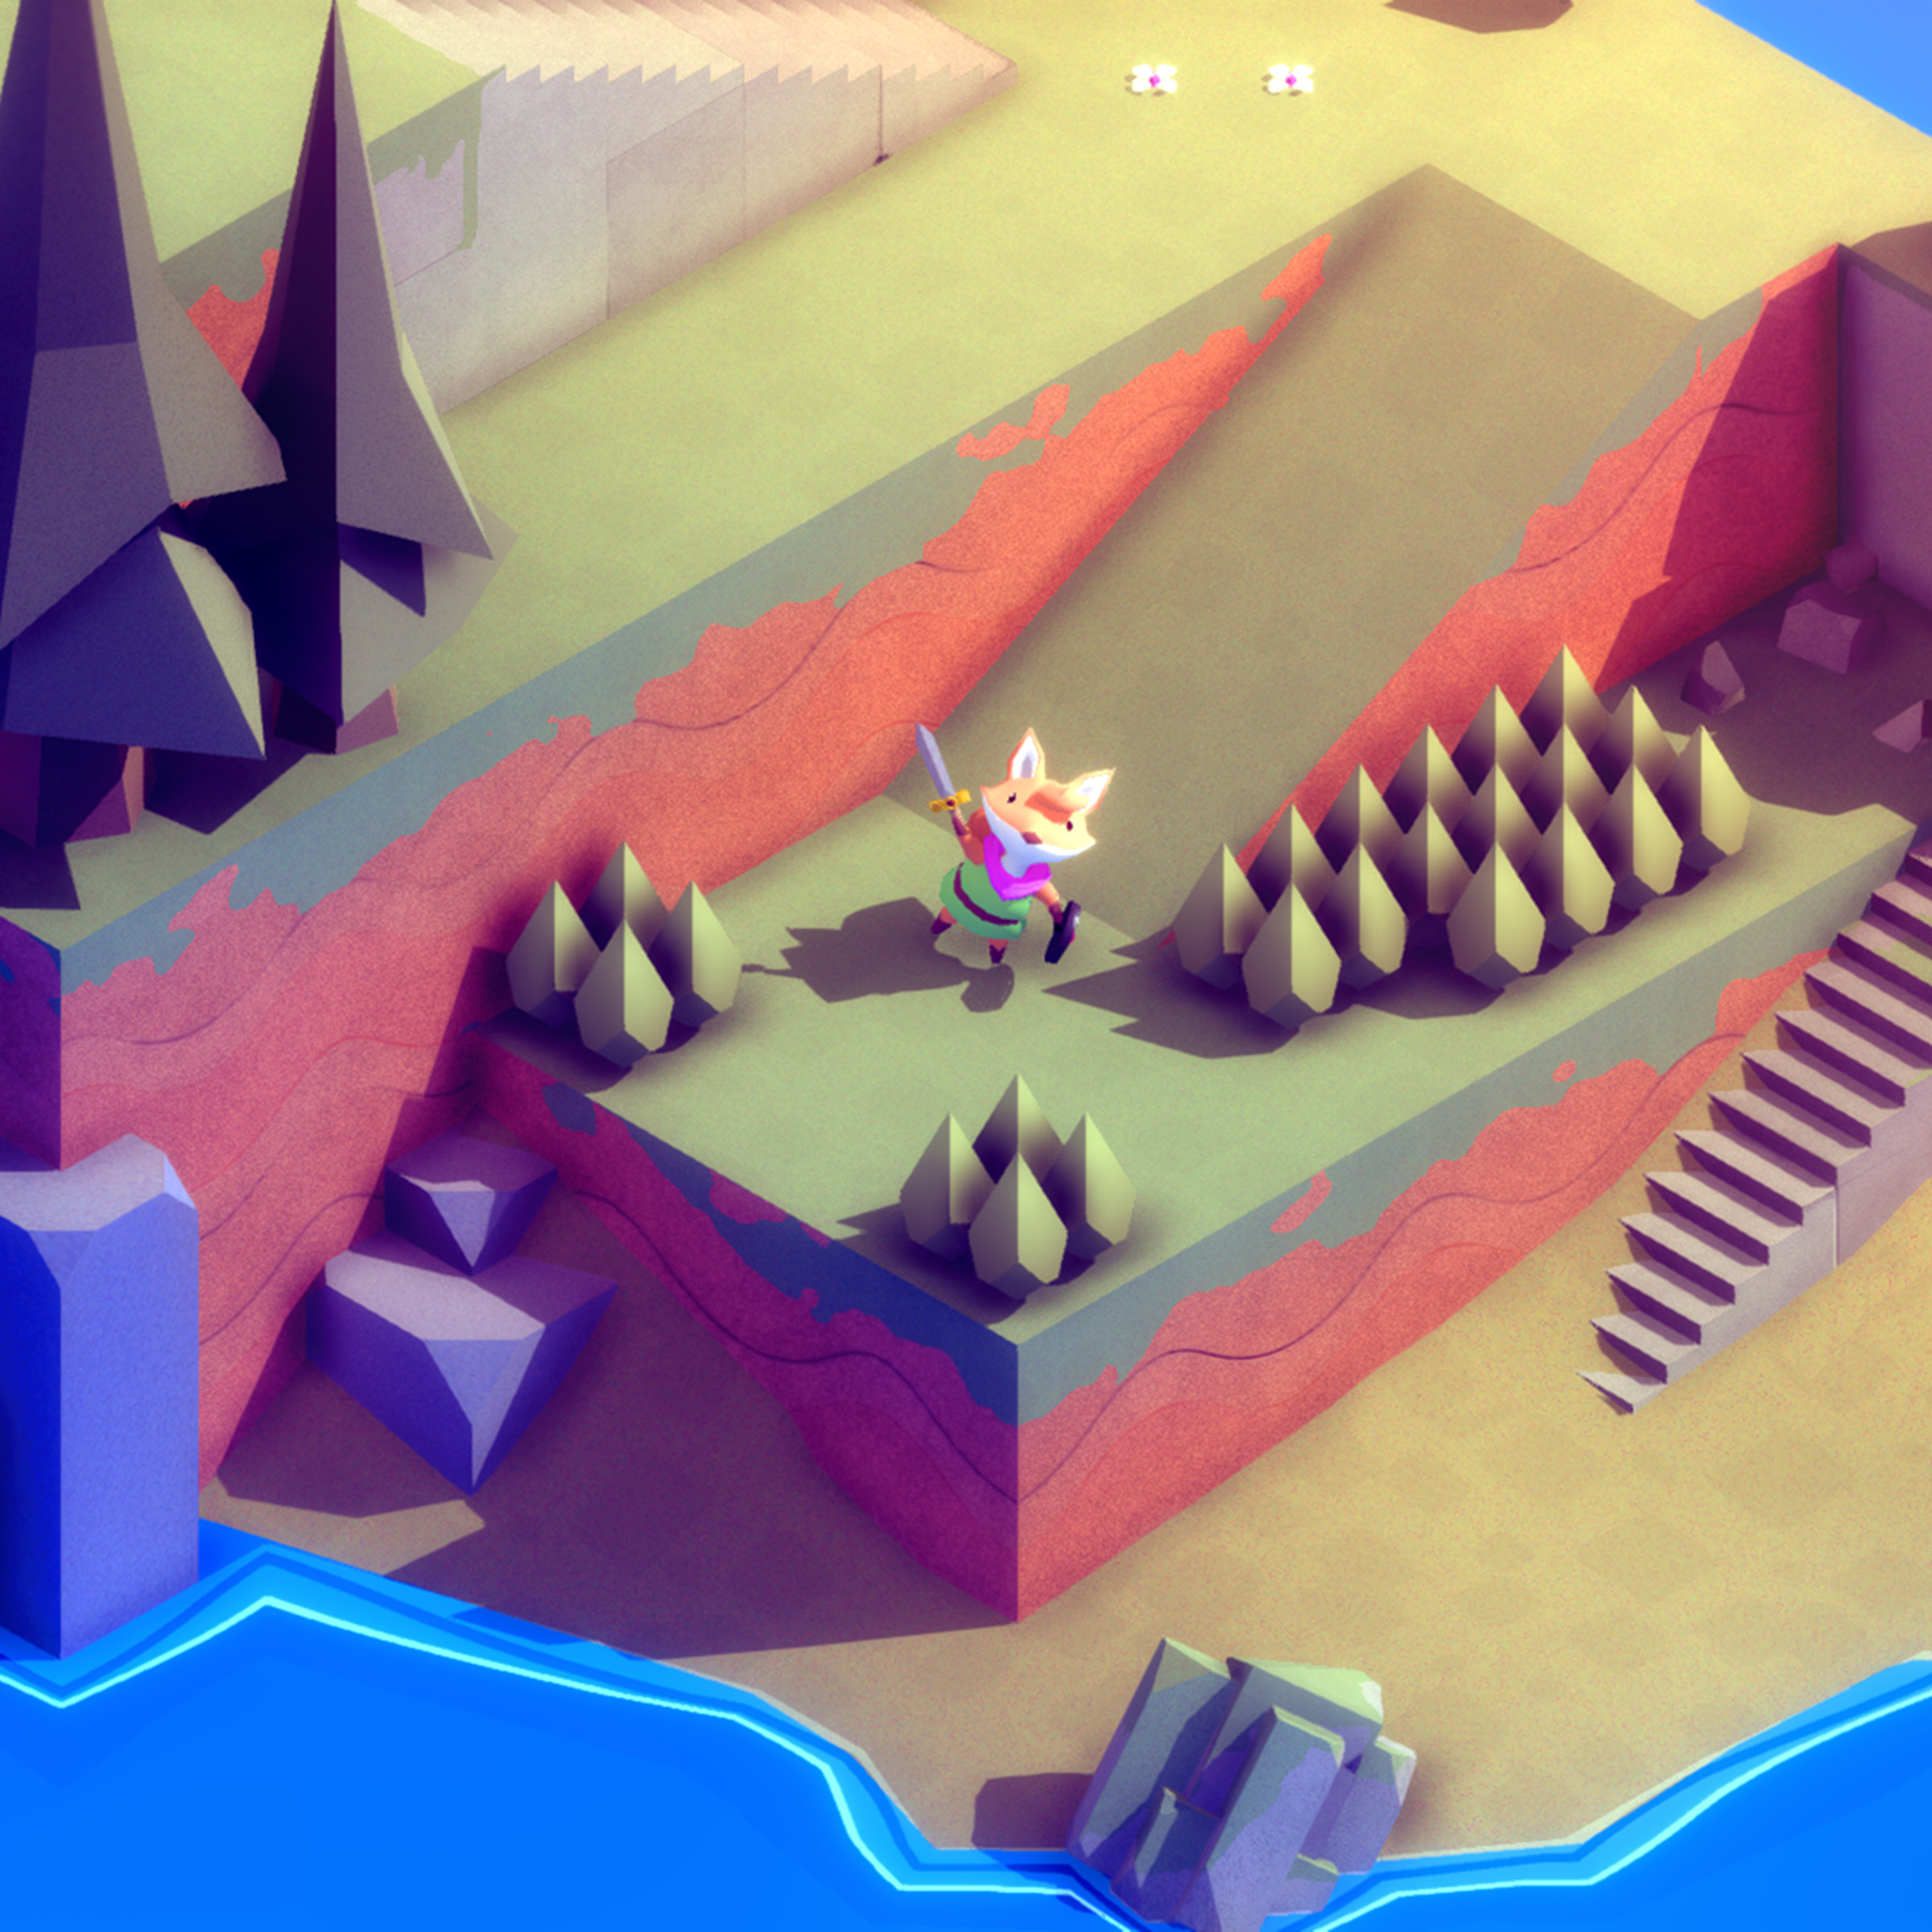 In a screenshot from Tunic, the main character stands with his sword raised on a plot of blocky land.